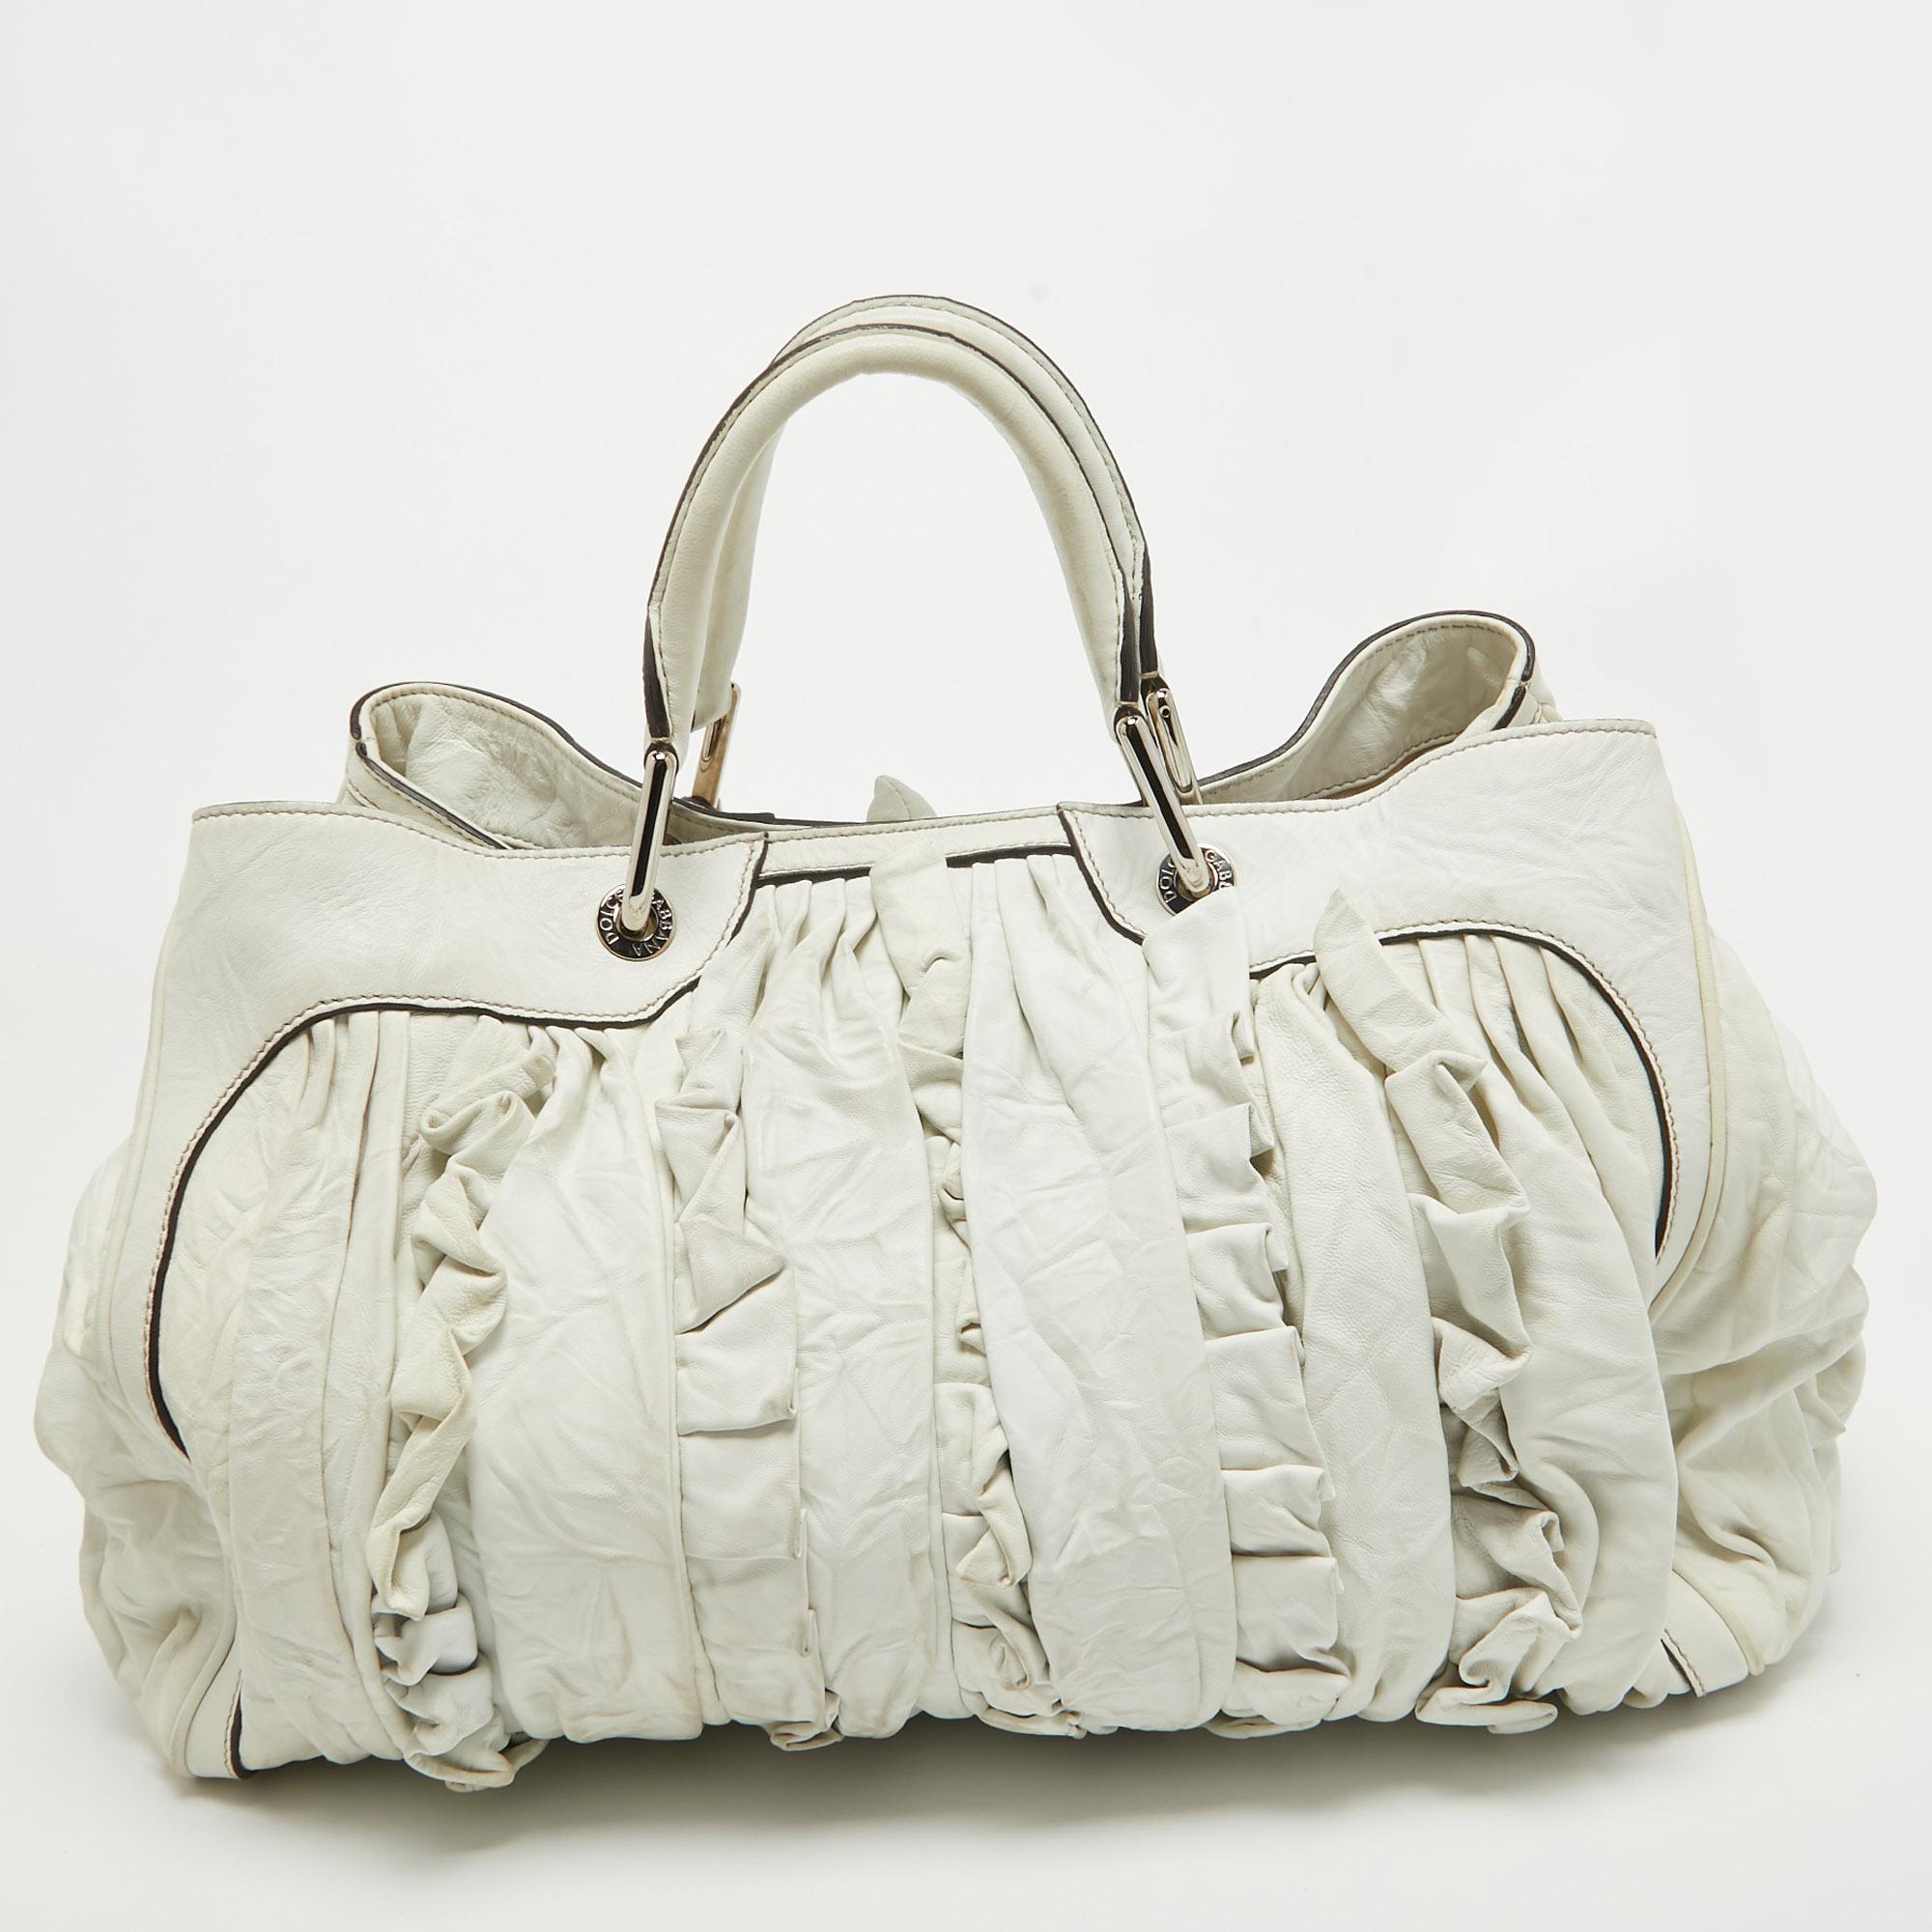 Dolce & Gabbana White Leather Ruffle Miss Brooke Satchel For Sale 13